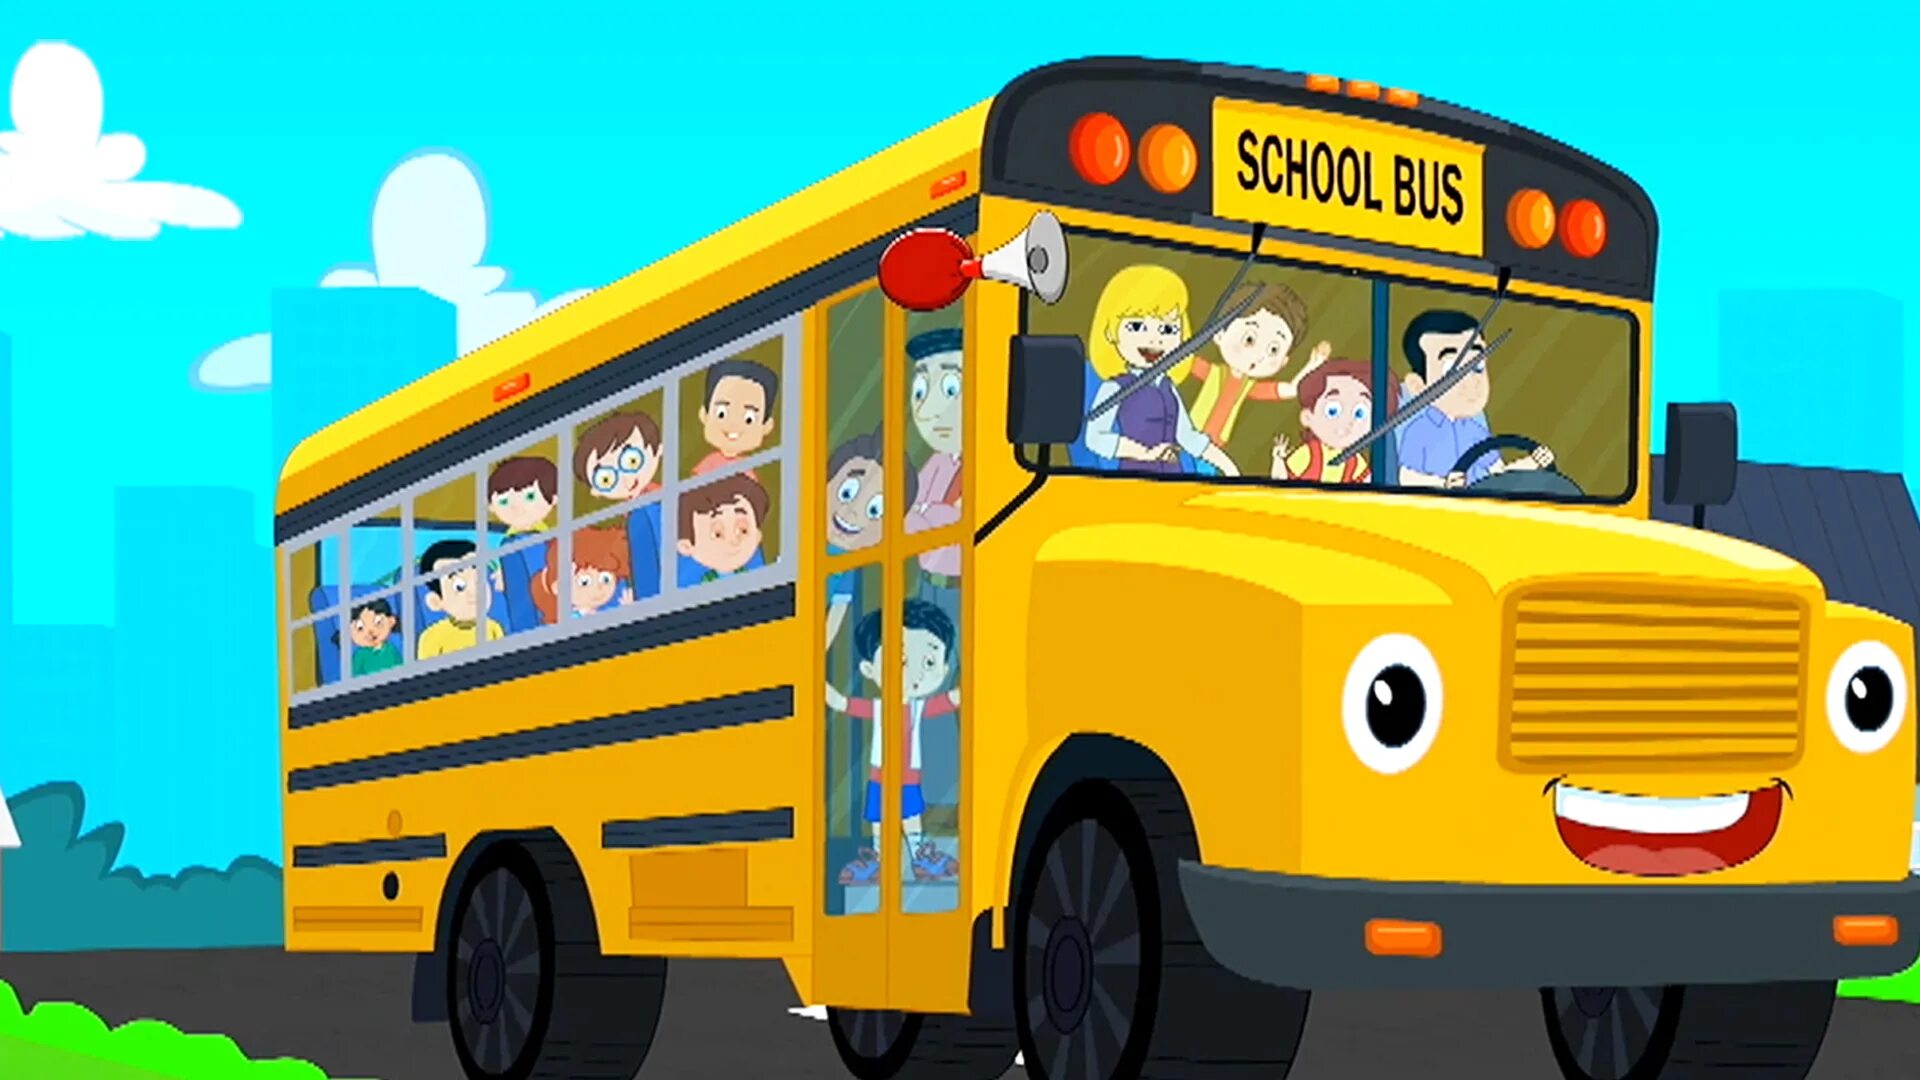 The Wheels on the Bus Cocomelon. Wheels on the Bus Юзи Юми. Wheels on the Bus Kids channel. Cocomelon автобус. Busing песни